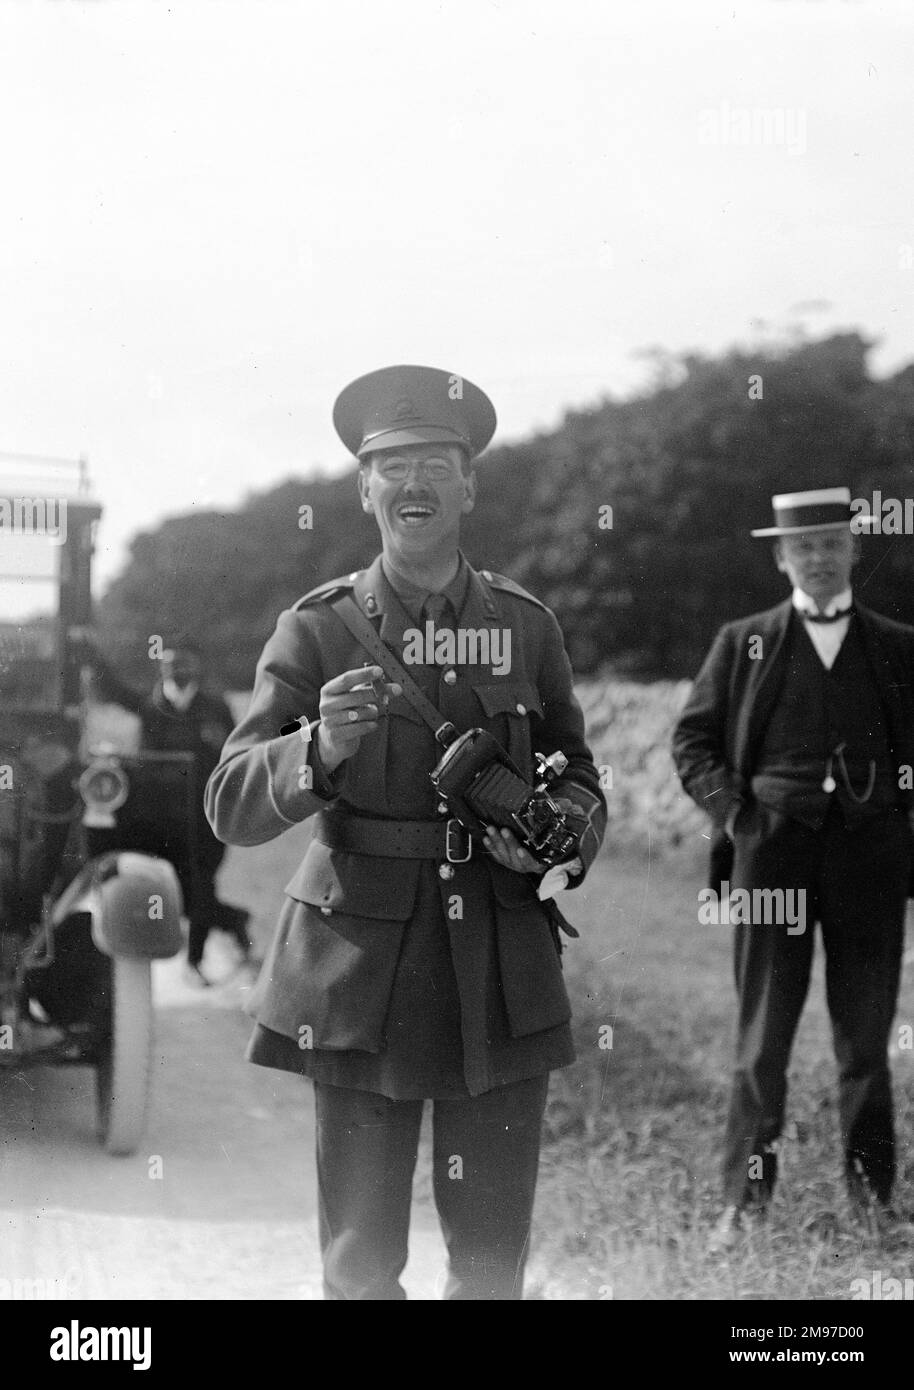 Soldier with camera, location unknown but believed to be in the UK. A delighfully spontaneous shot with short depth of field giving maximum prominence to the main subject, obviously a fellow camera enthusiast! Stock Photo